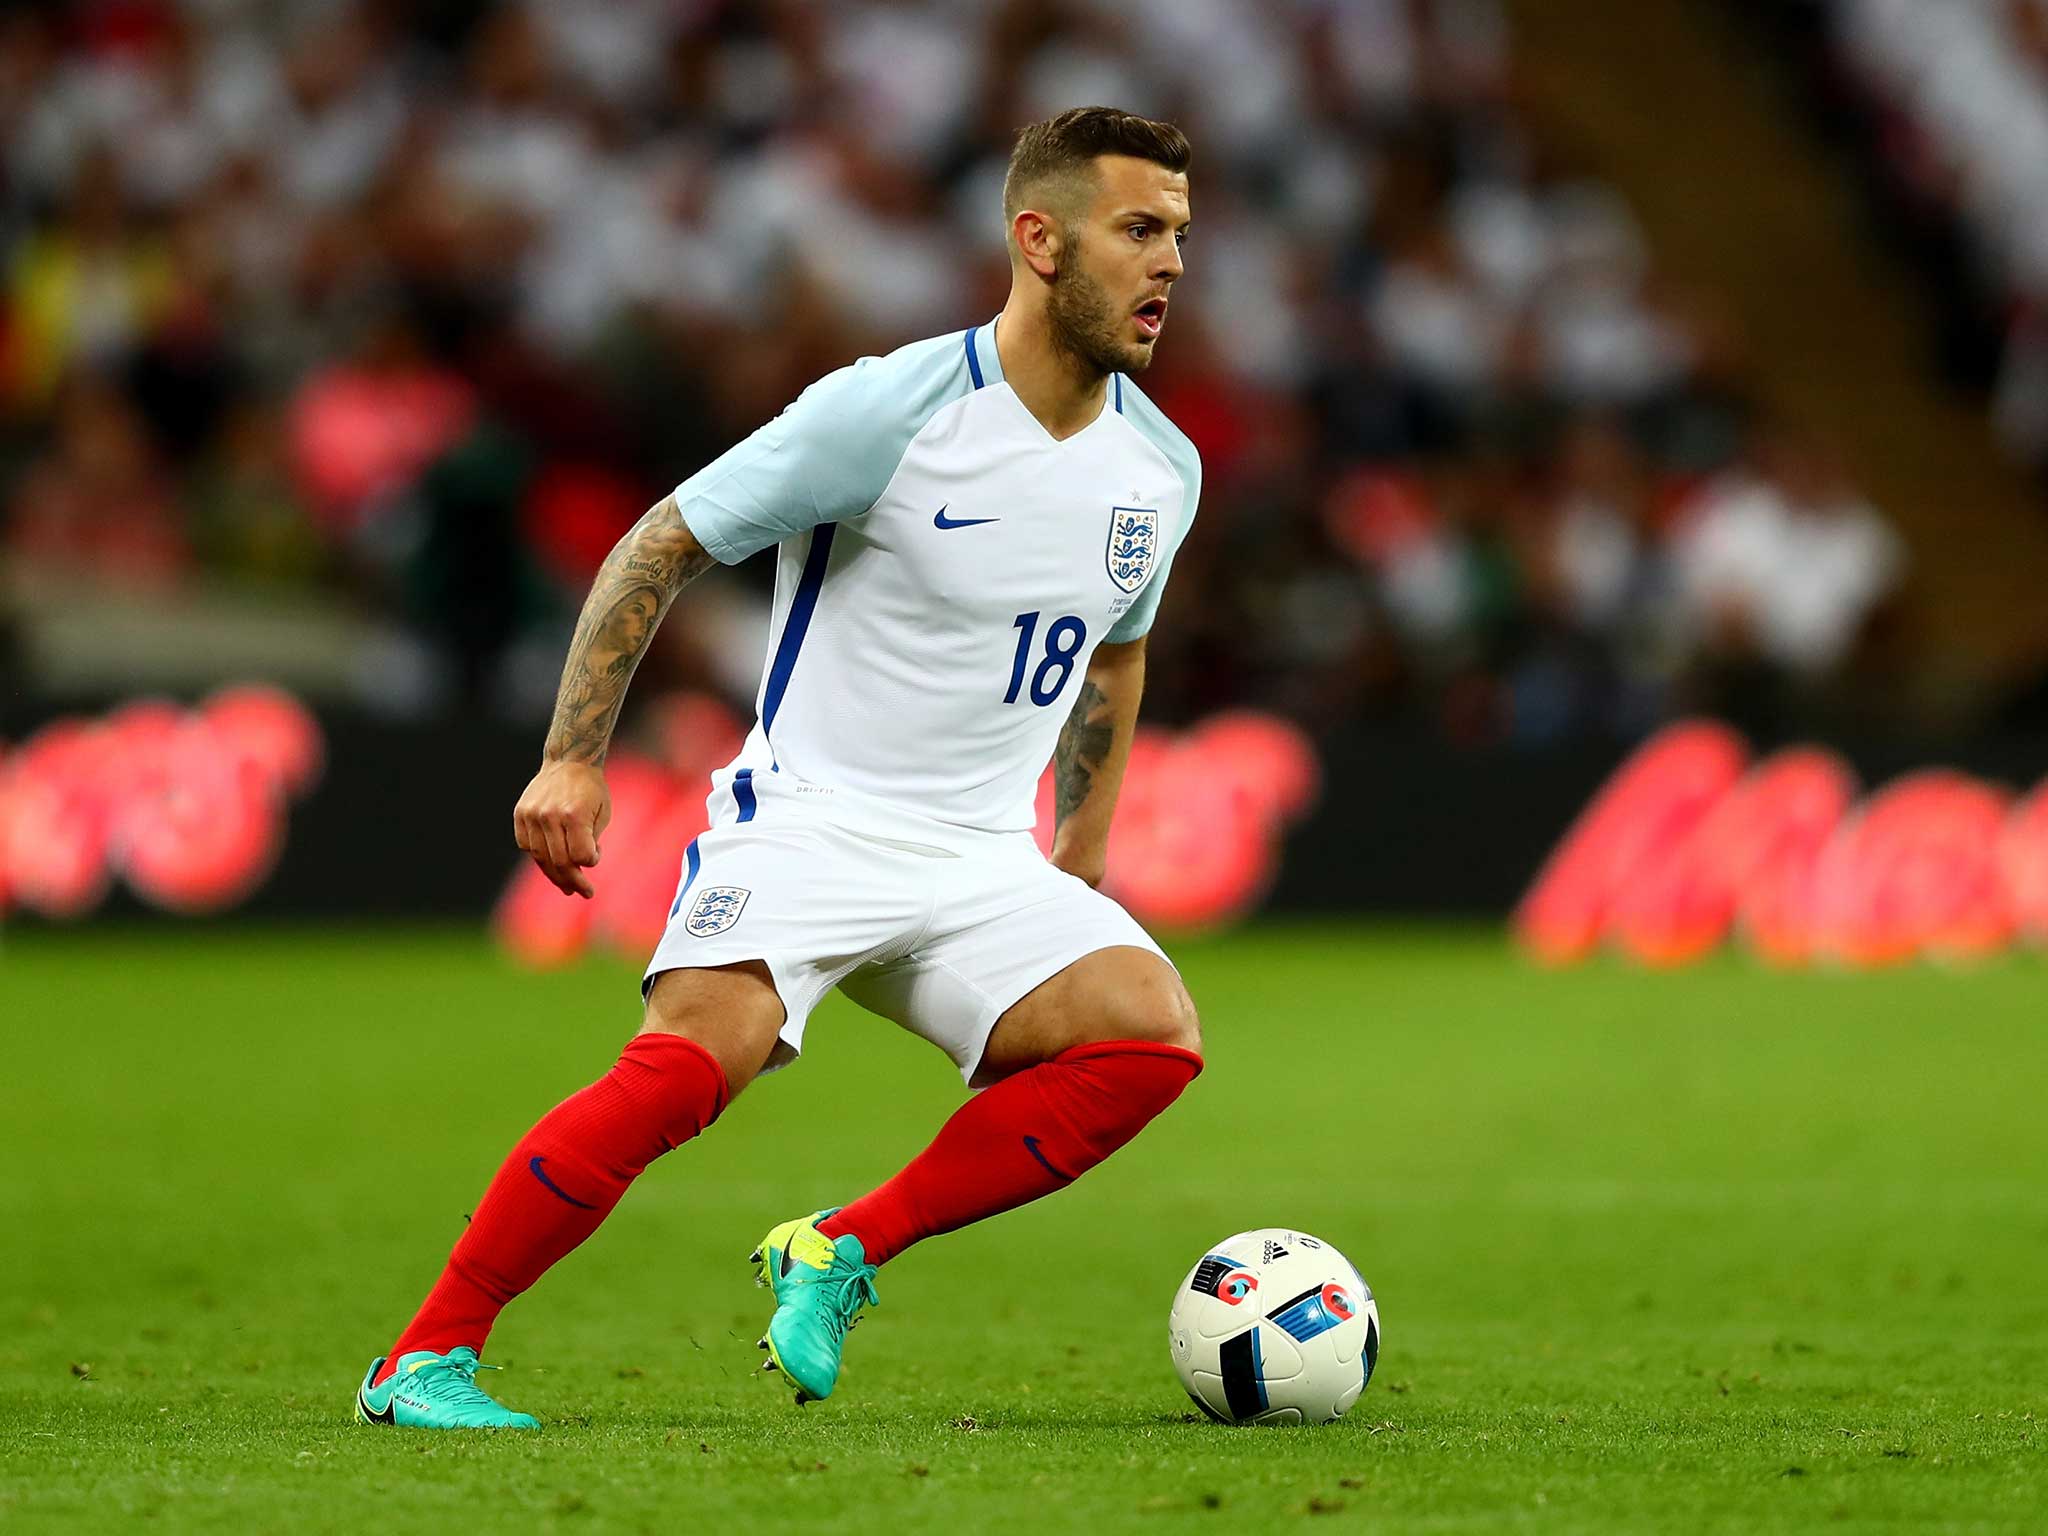 Jack Wilshere's presence in the squad has been called into question